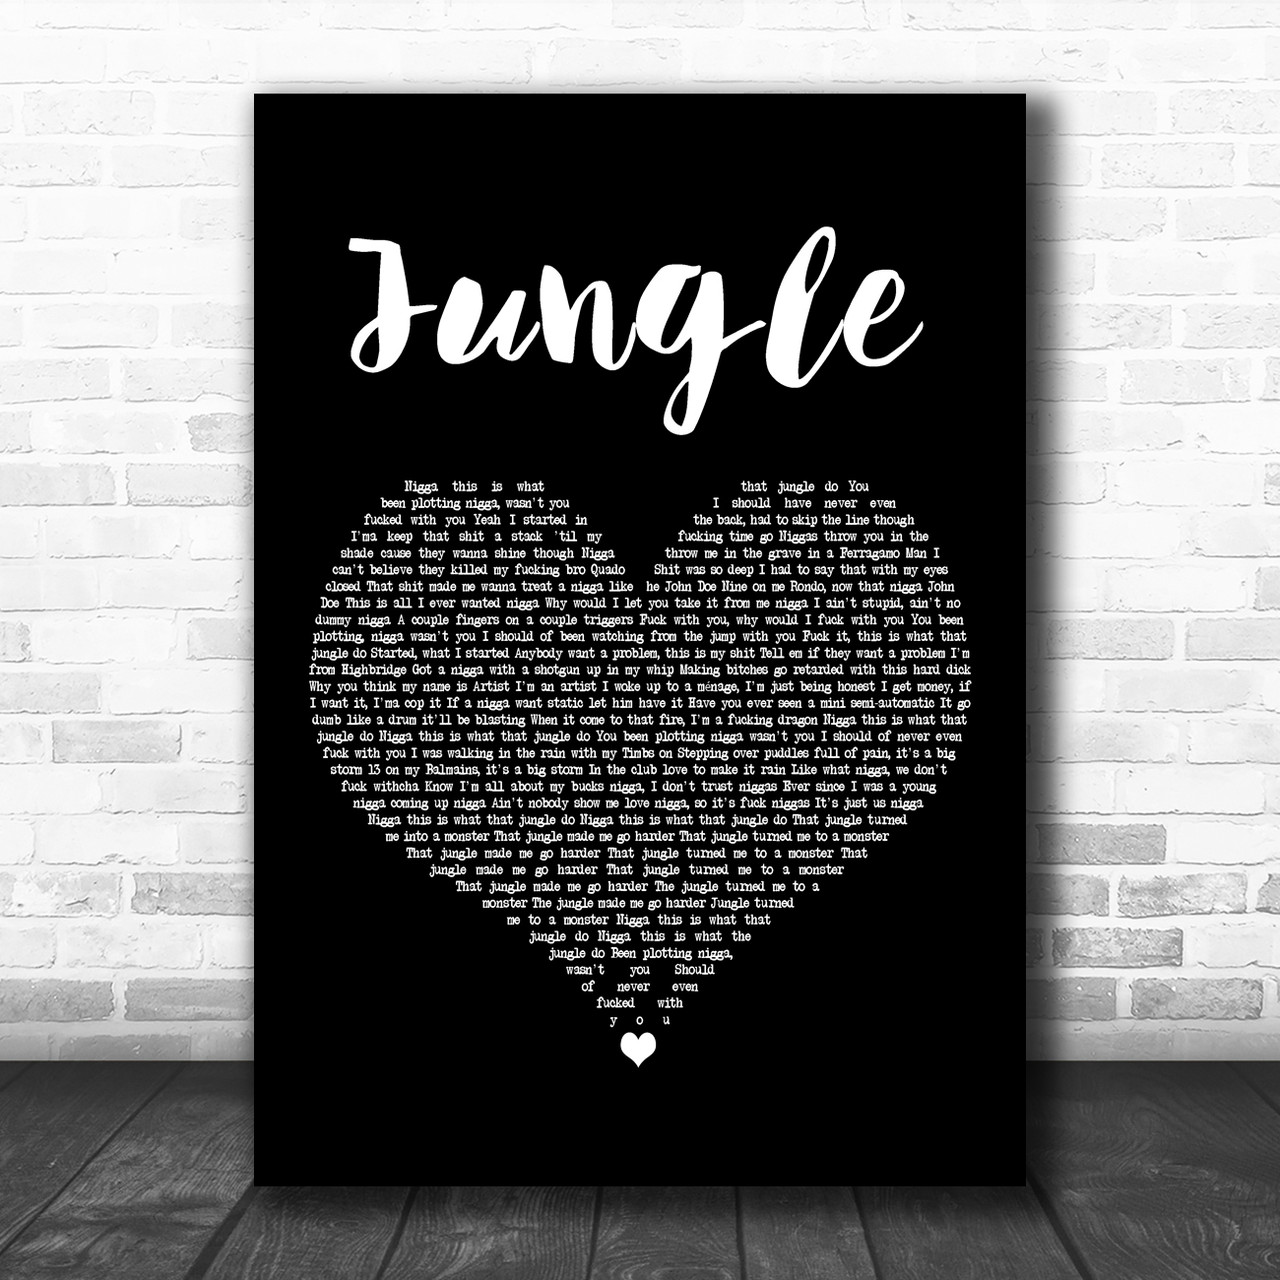 Welcome to the Jungle Lyric Wall Decal